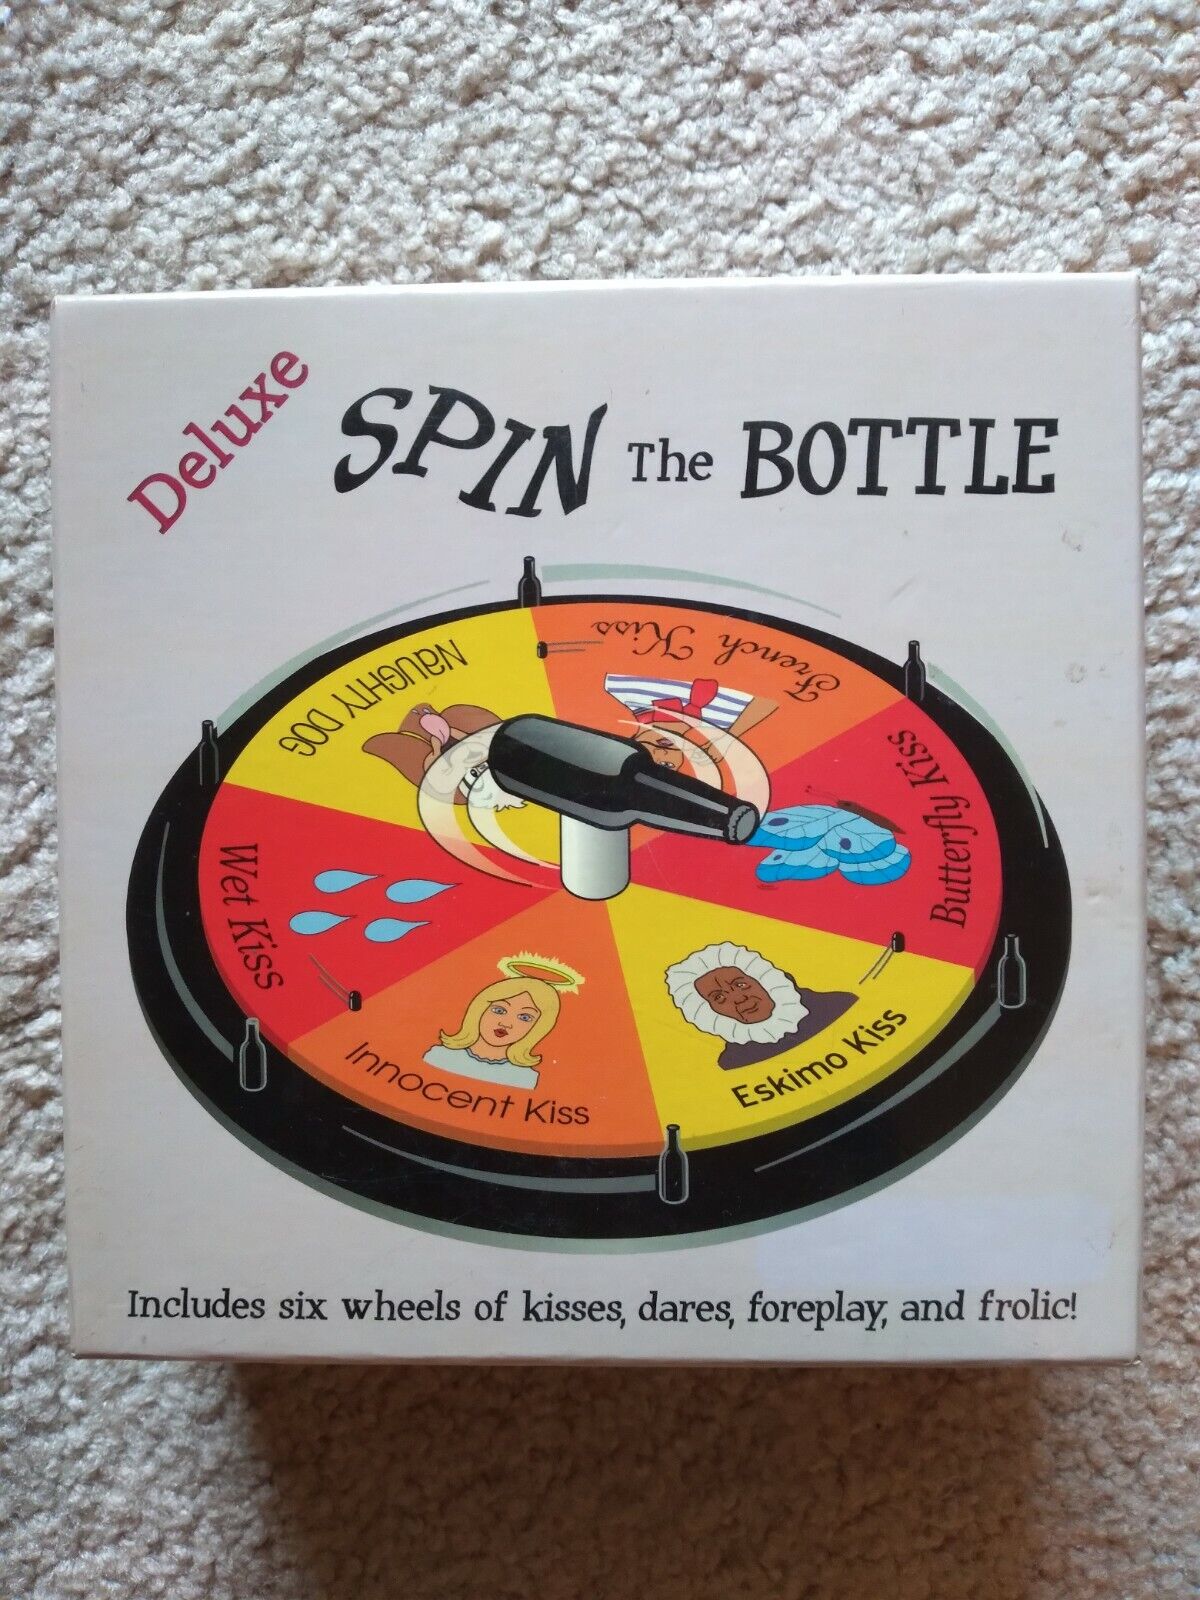 dave beninger add spin the bottle dirty photo